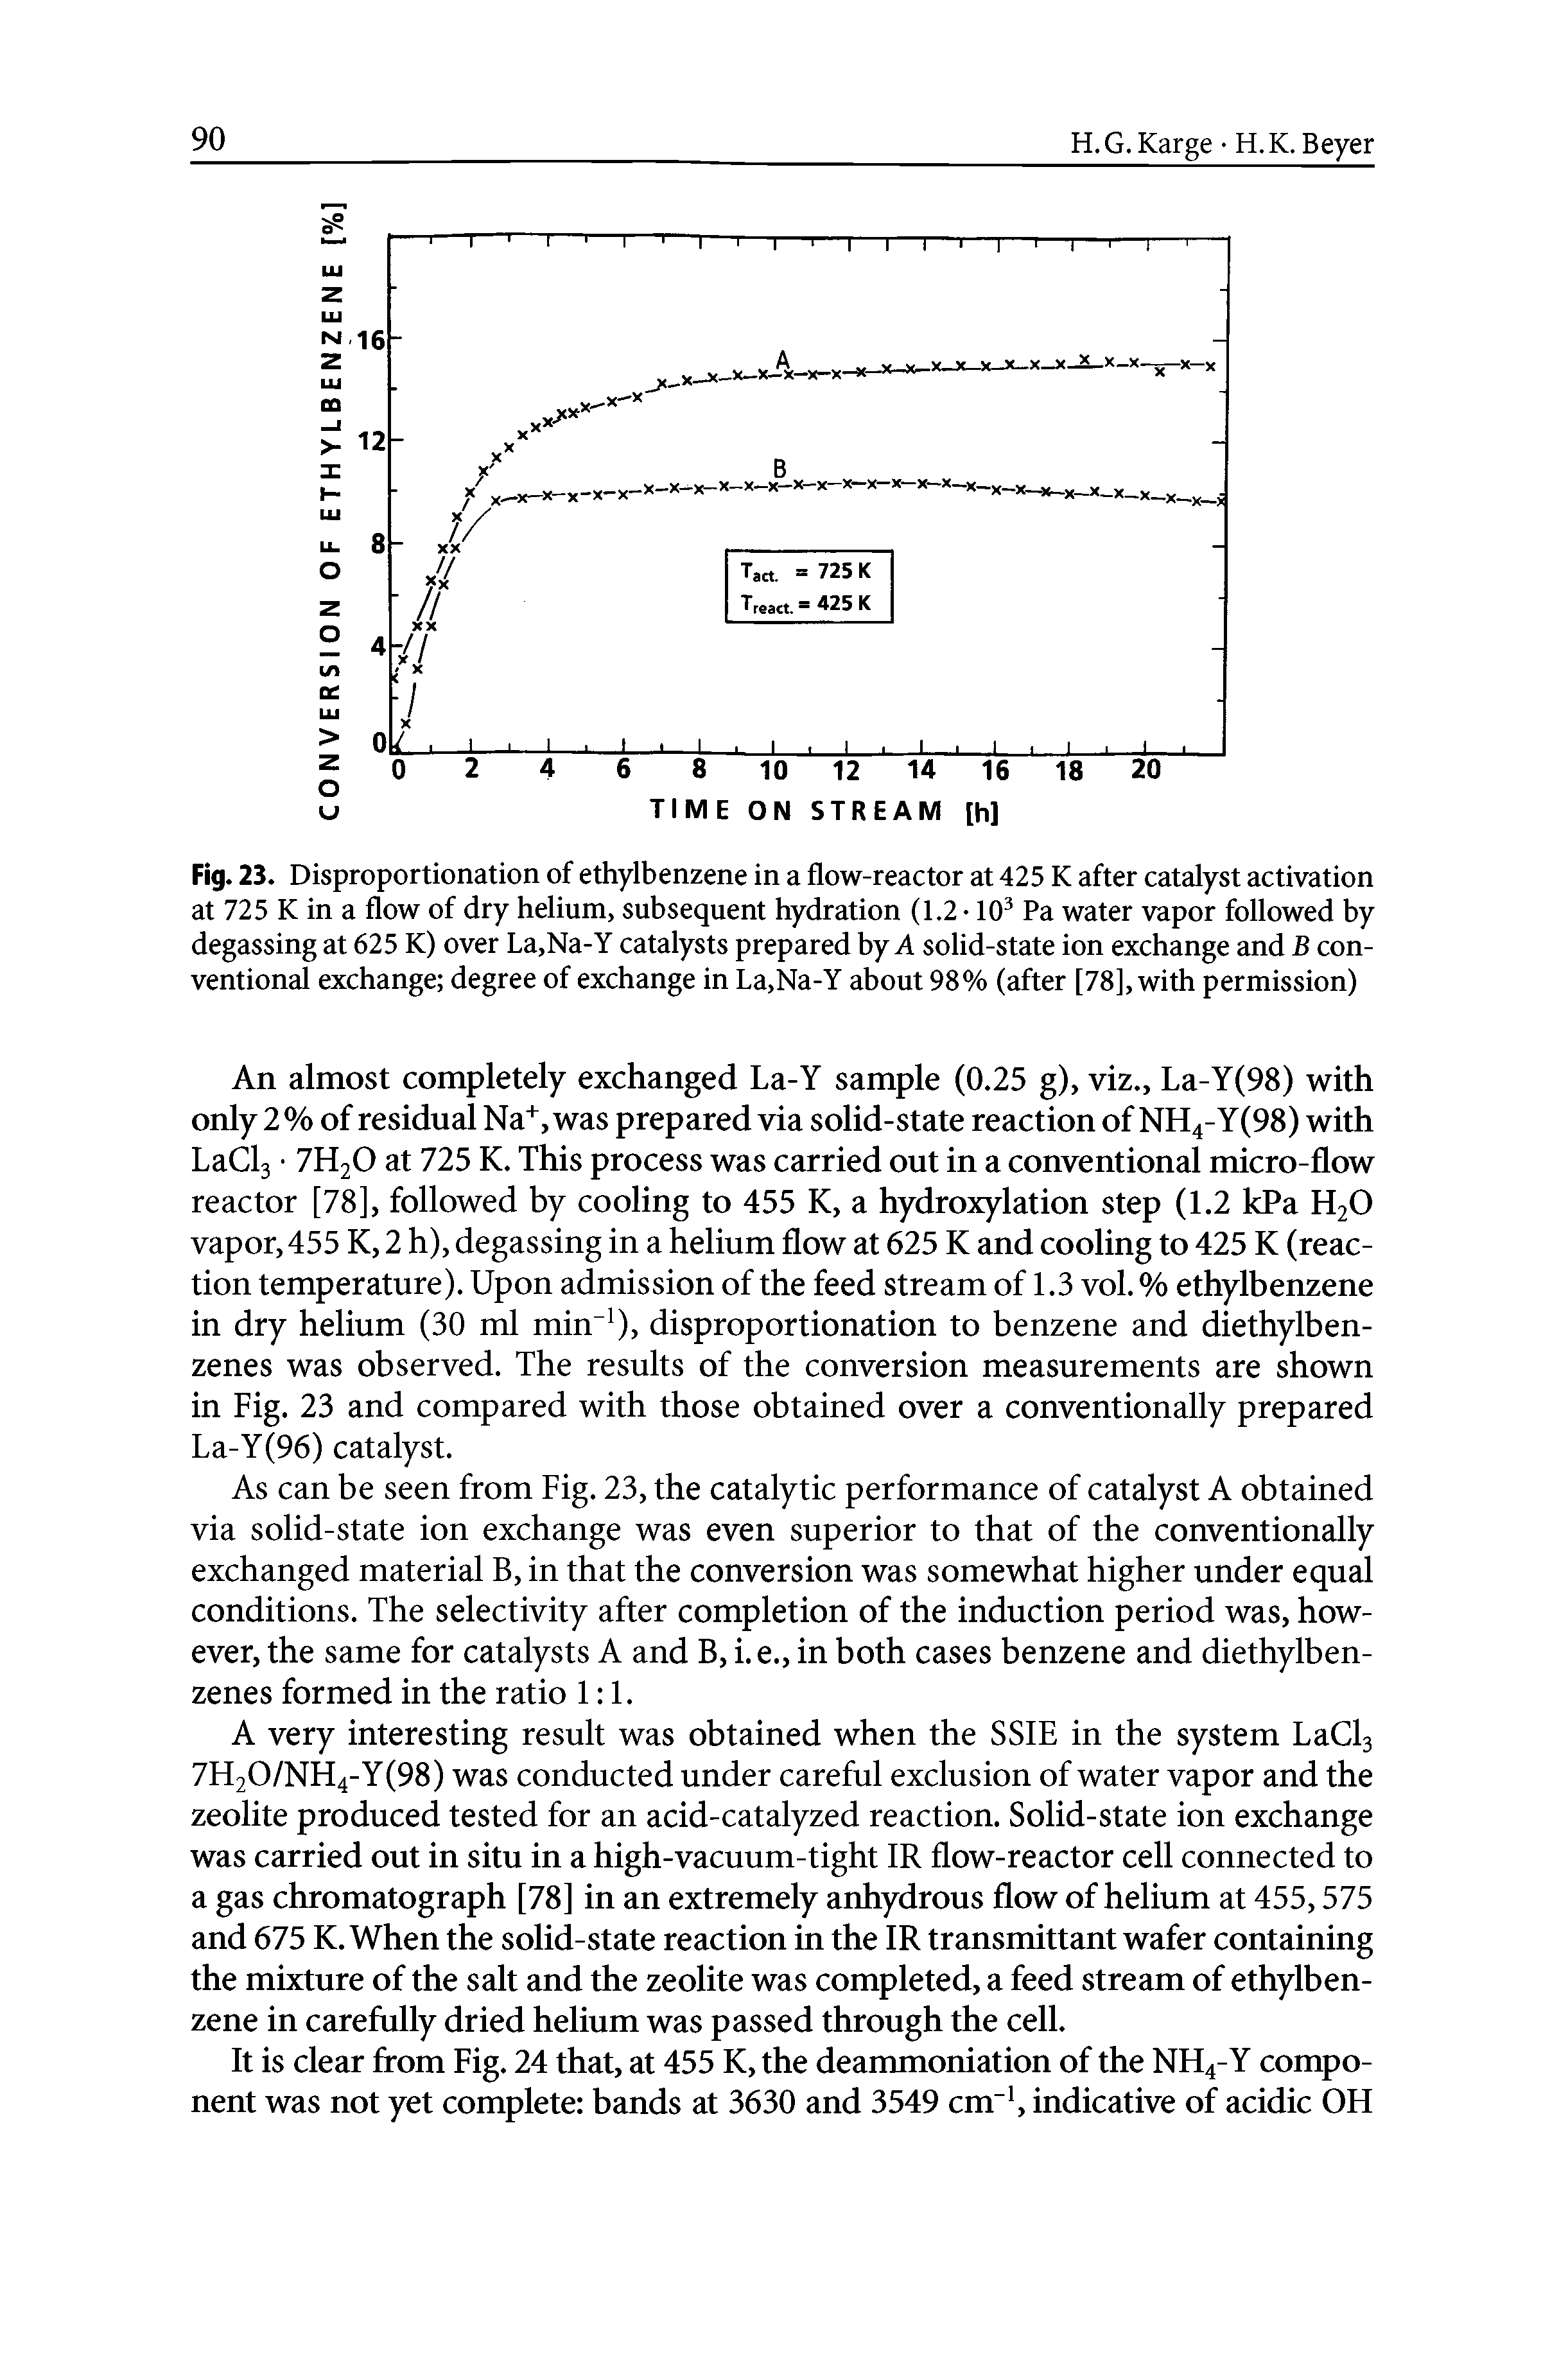 Fig. 23. Disproportionation of ethylbenzene in a flow-reactor at 425 K after catalyst activation at 725 K in a flow of dry helium, subsequent hydration (1.2 10 Pa water vapor followed by degassing at 625 K) over La,Na-Y catalysts prepared by A solid-state ion exchange and B conventional exchange degree of exchange in La,Na-Y about 98% (after [78], with permission)...